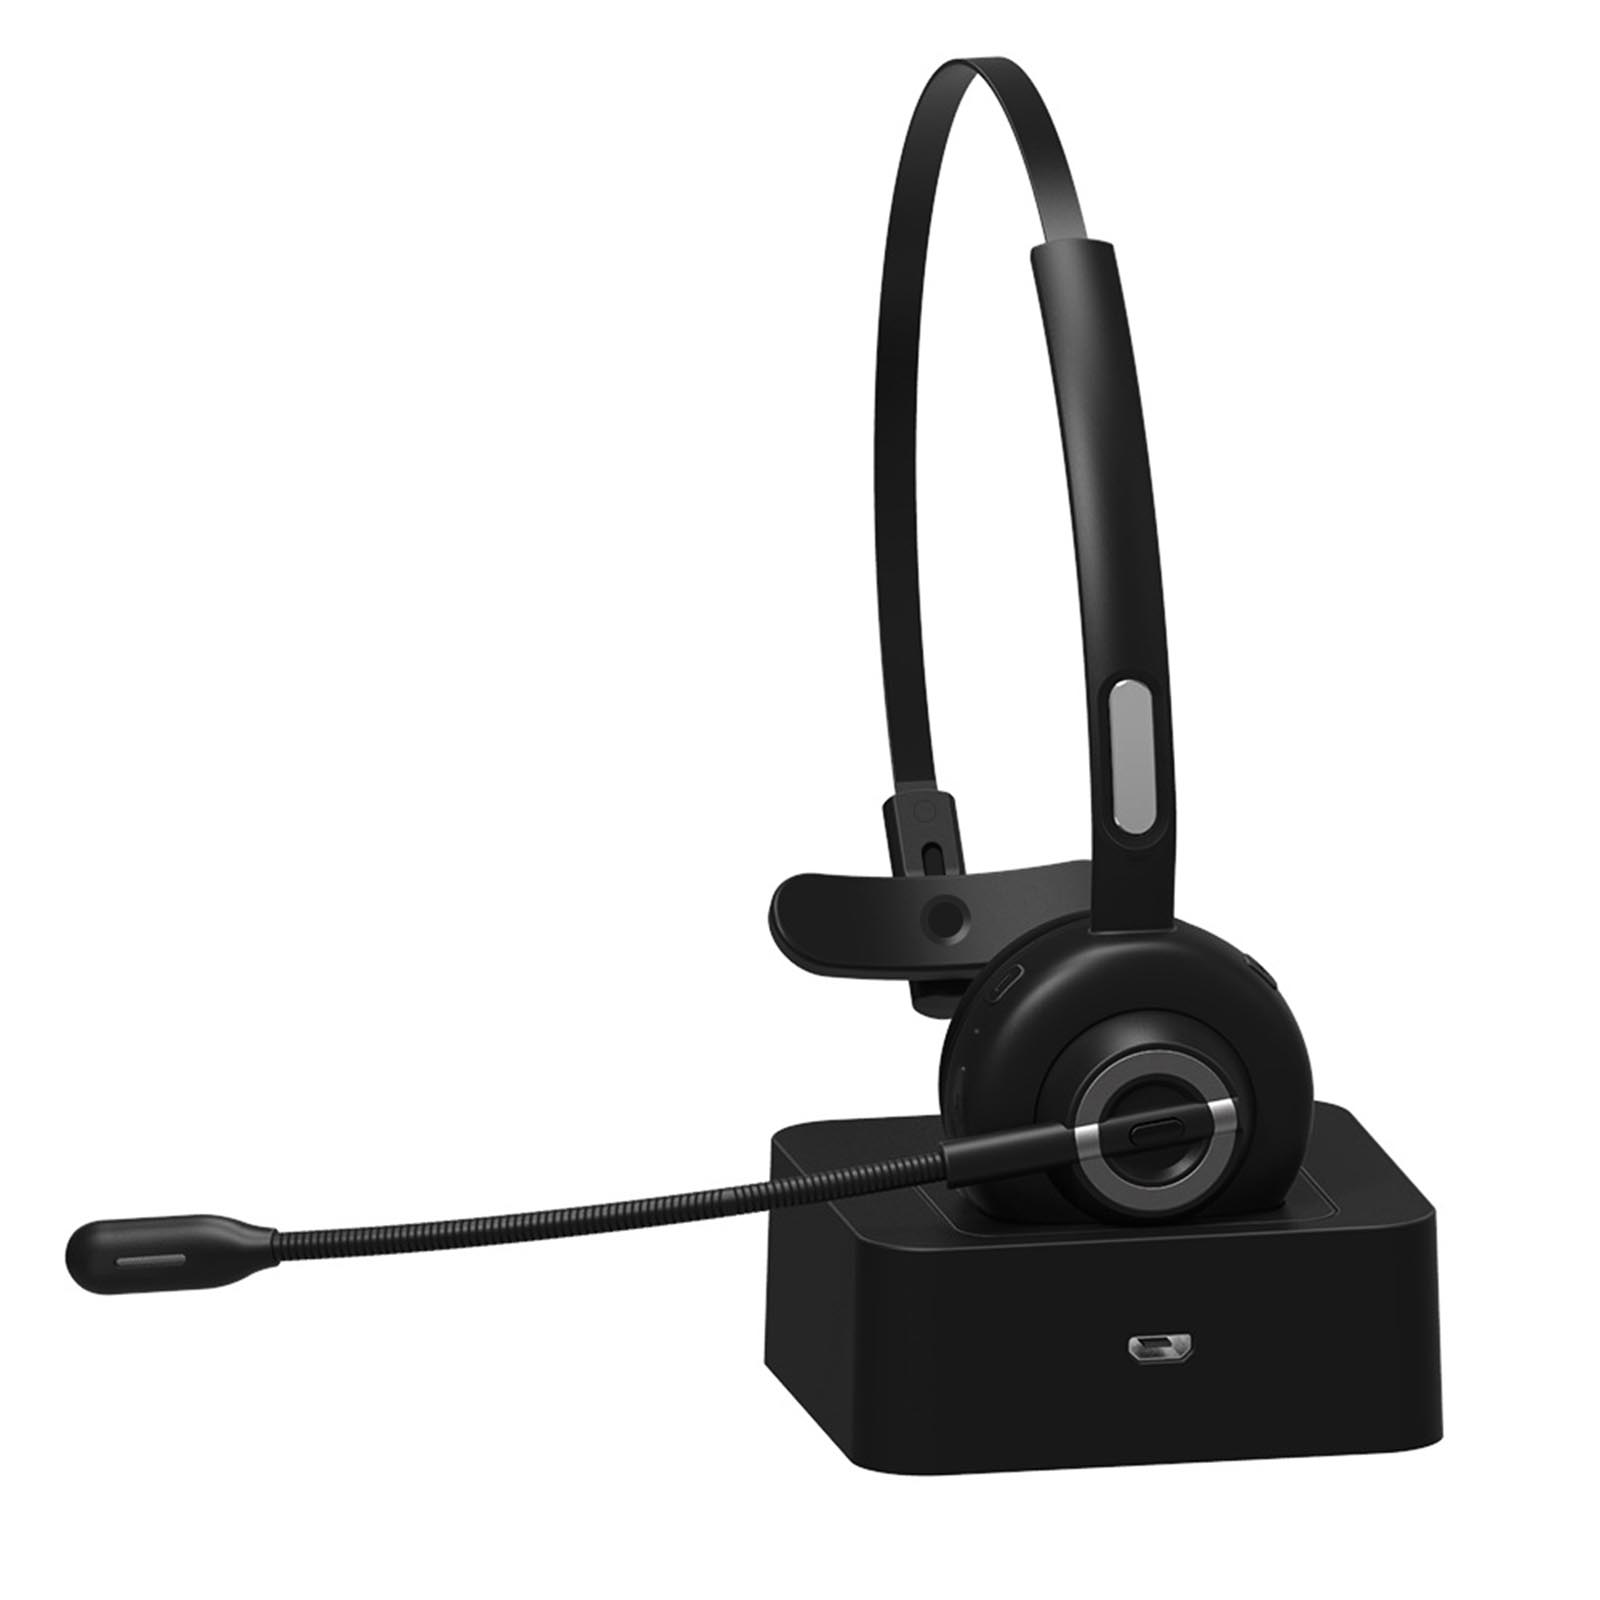 BH-M97 On Ear Headset Bluetooth 5.0 Wireless Headphones Call Center Earphone with Noise Cancelling Microphone Adjustable Headband Volume Control with Charging Dock